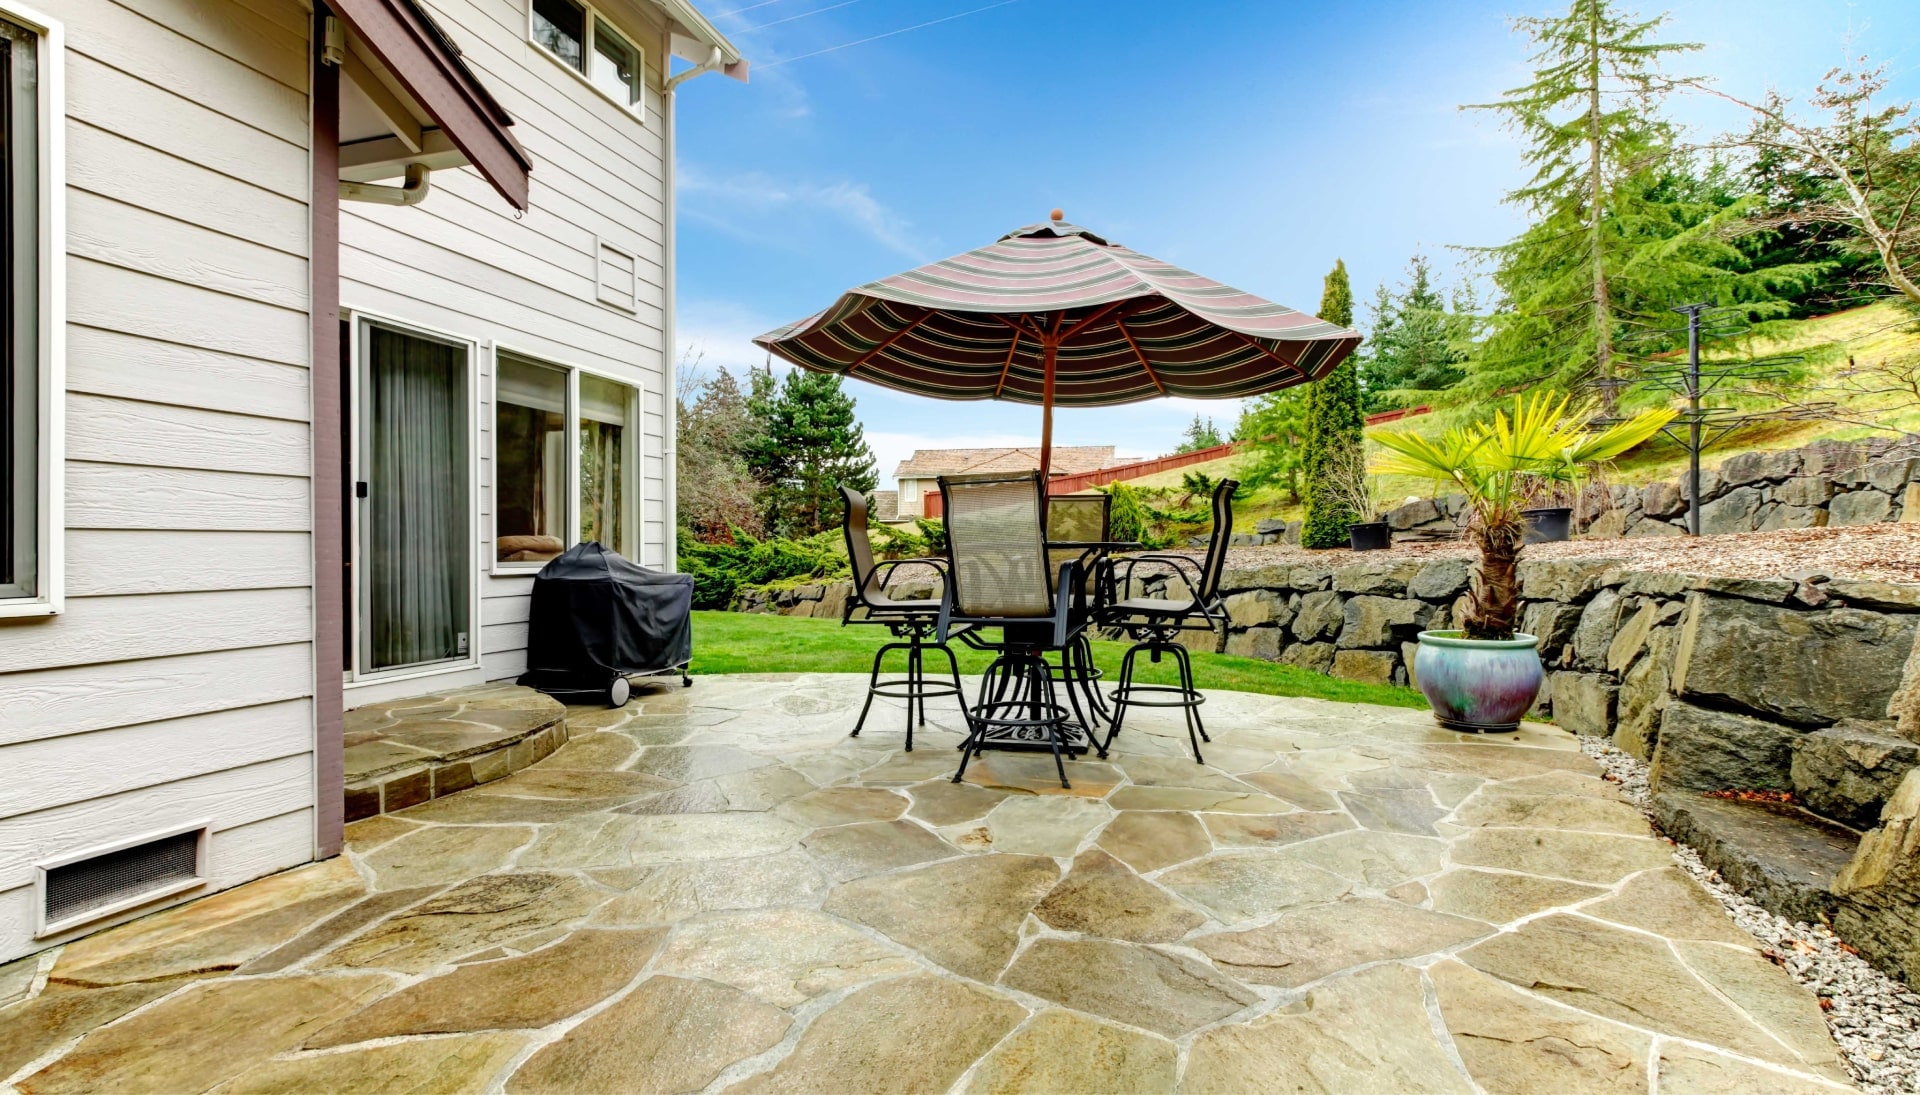 Beautifully Textured and Patterned Concrete Patios in Salt Lake City, Utah area!